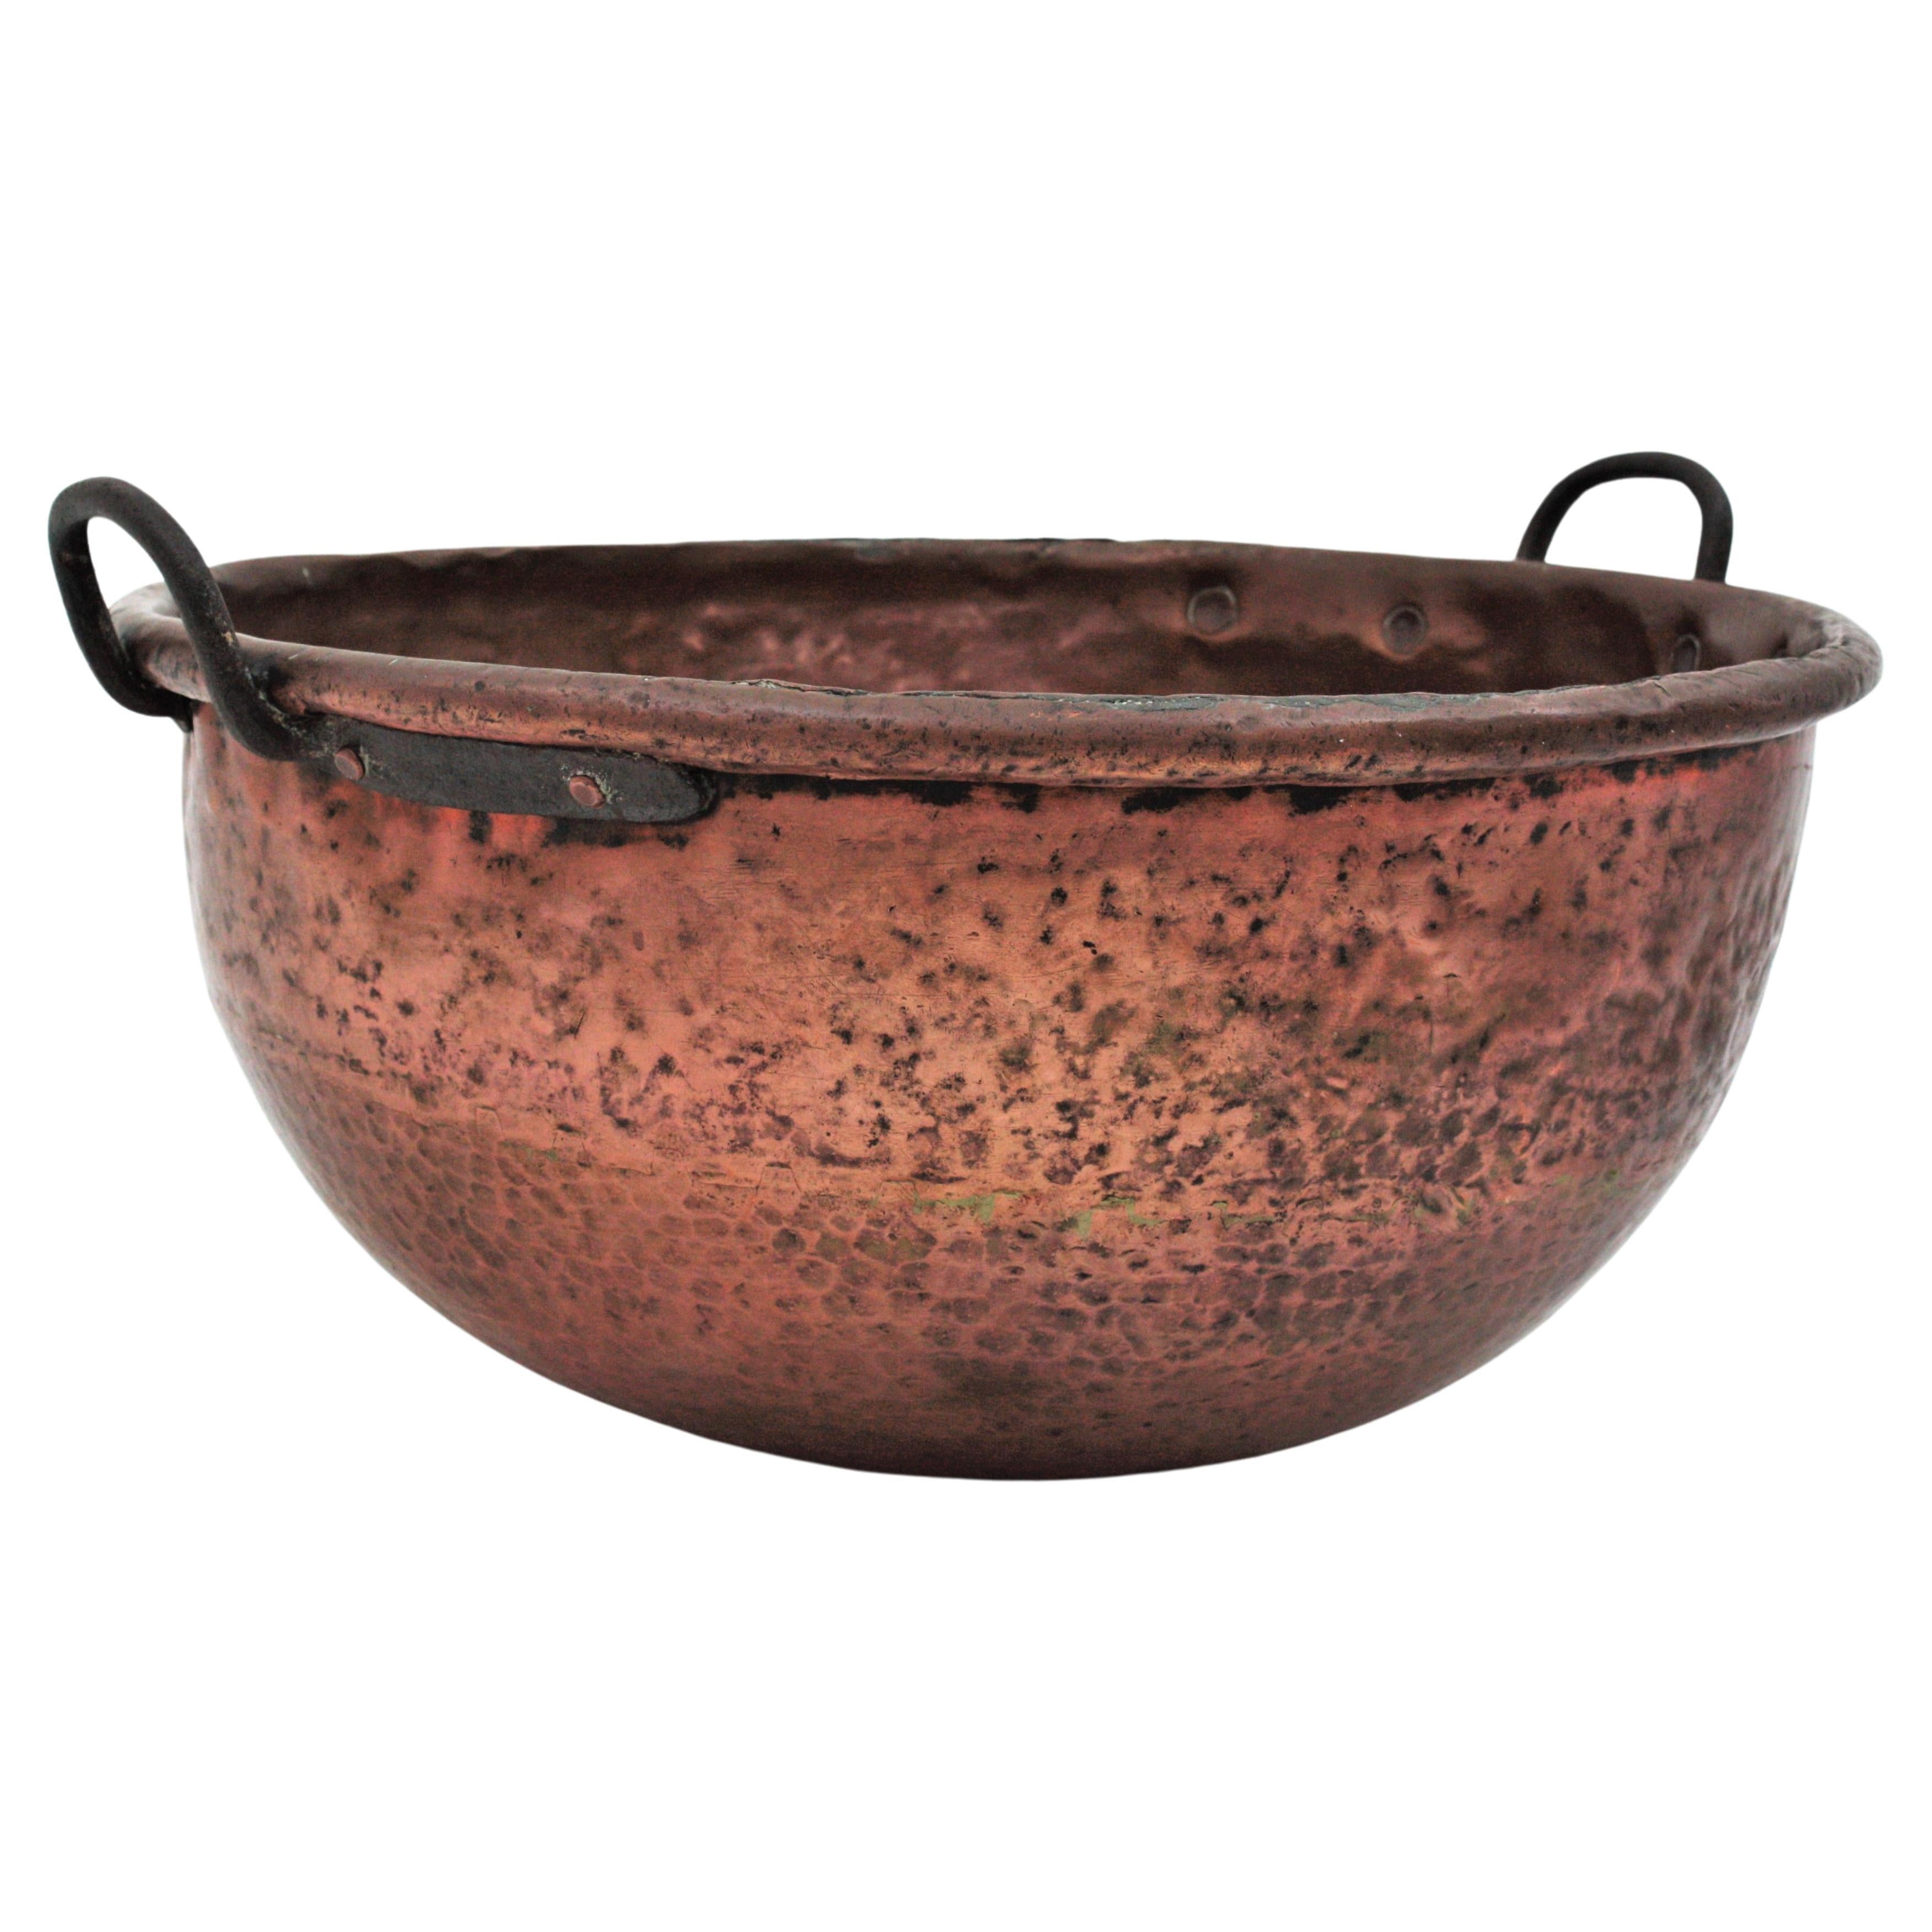 Oversized hand-hammered copper cauldron with iron handles. France, early 20th century.
This handcrafted copper cauldron has a terrific aged patina. It has a thick rolled rim and forged iron handles attached to the pot with iron studs. The copper is